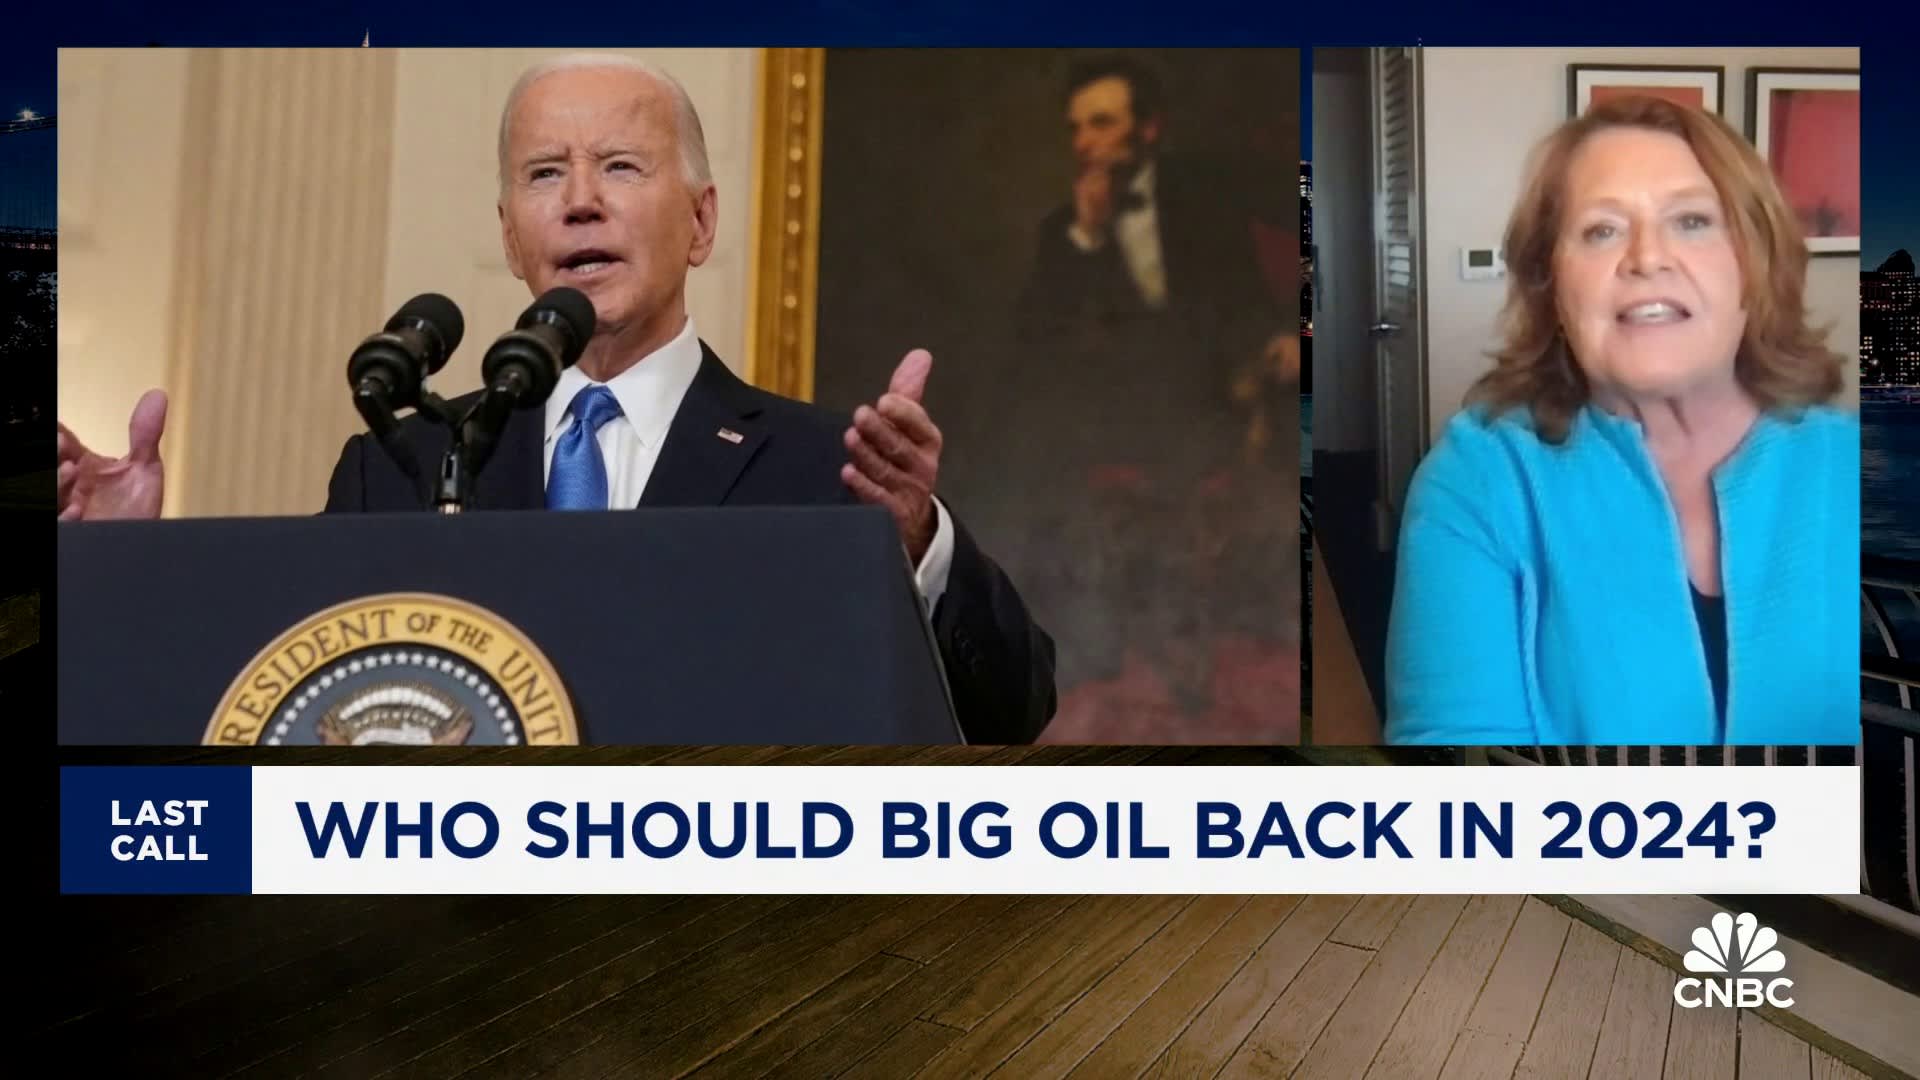 U.S. oil production driven by money, ‘not federal policy’, says Fmr. Sen Heidi Heitkamp [Video]